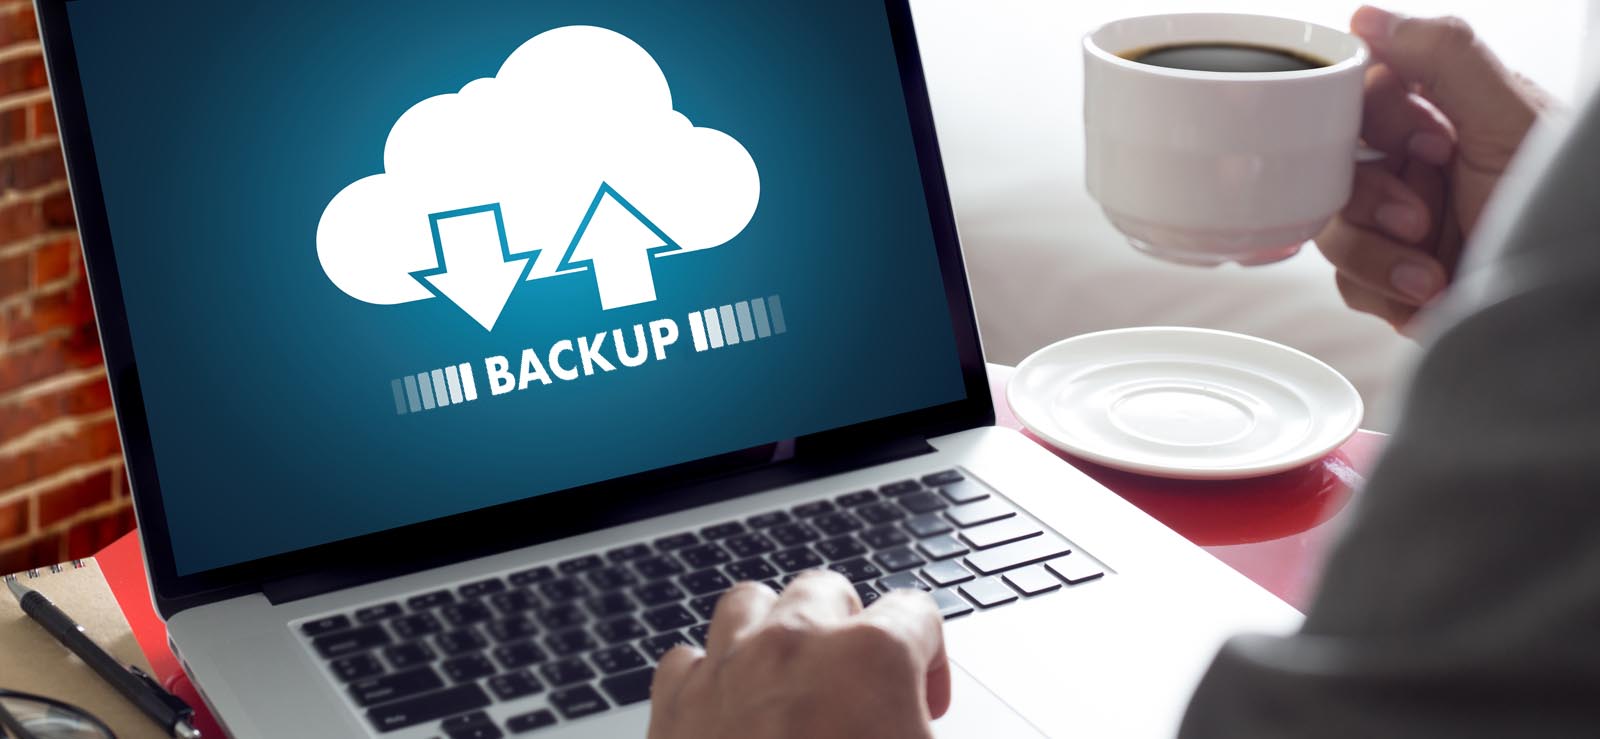 Why Office 365 Tenant Needs Backup?